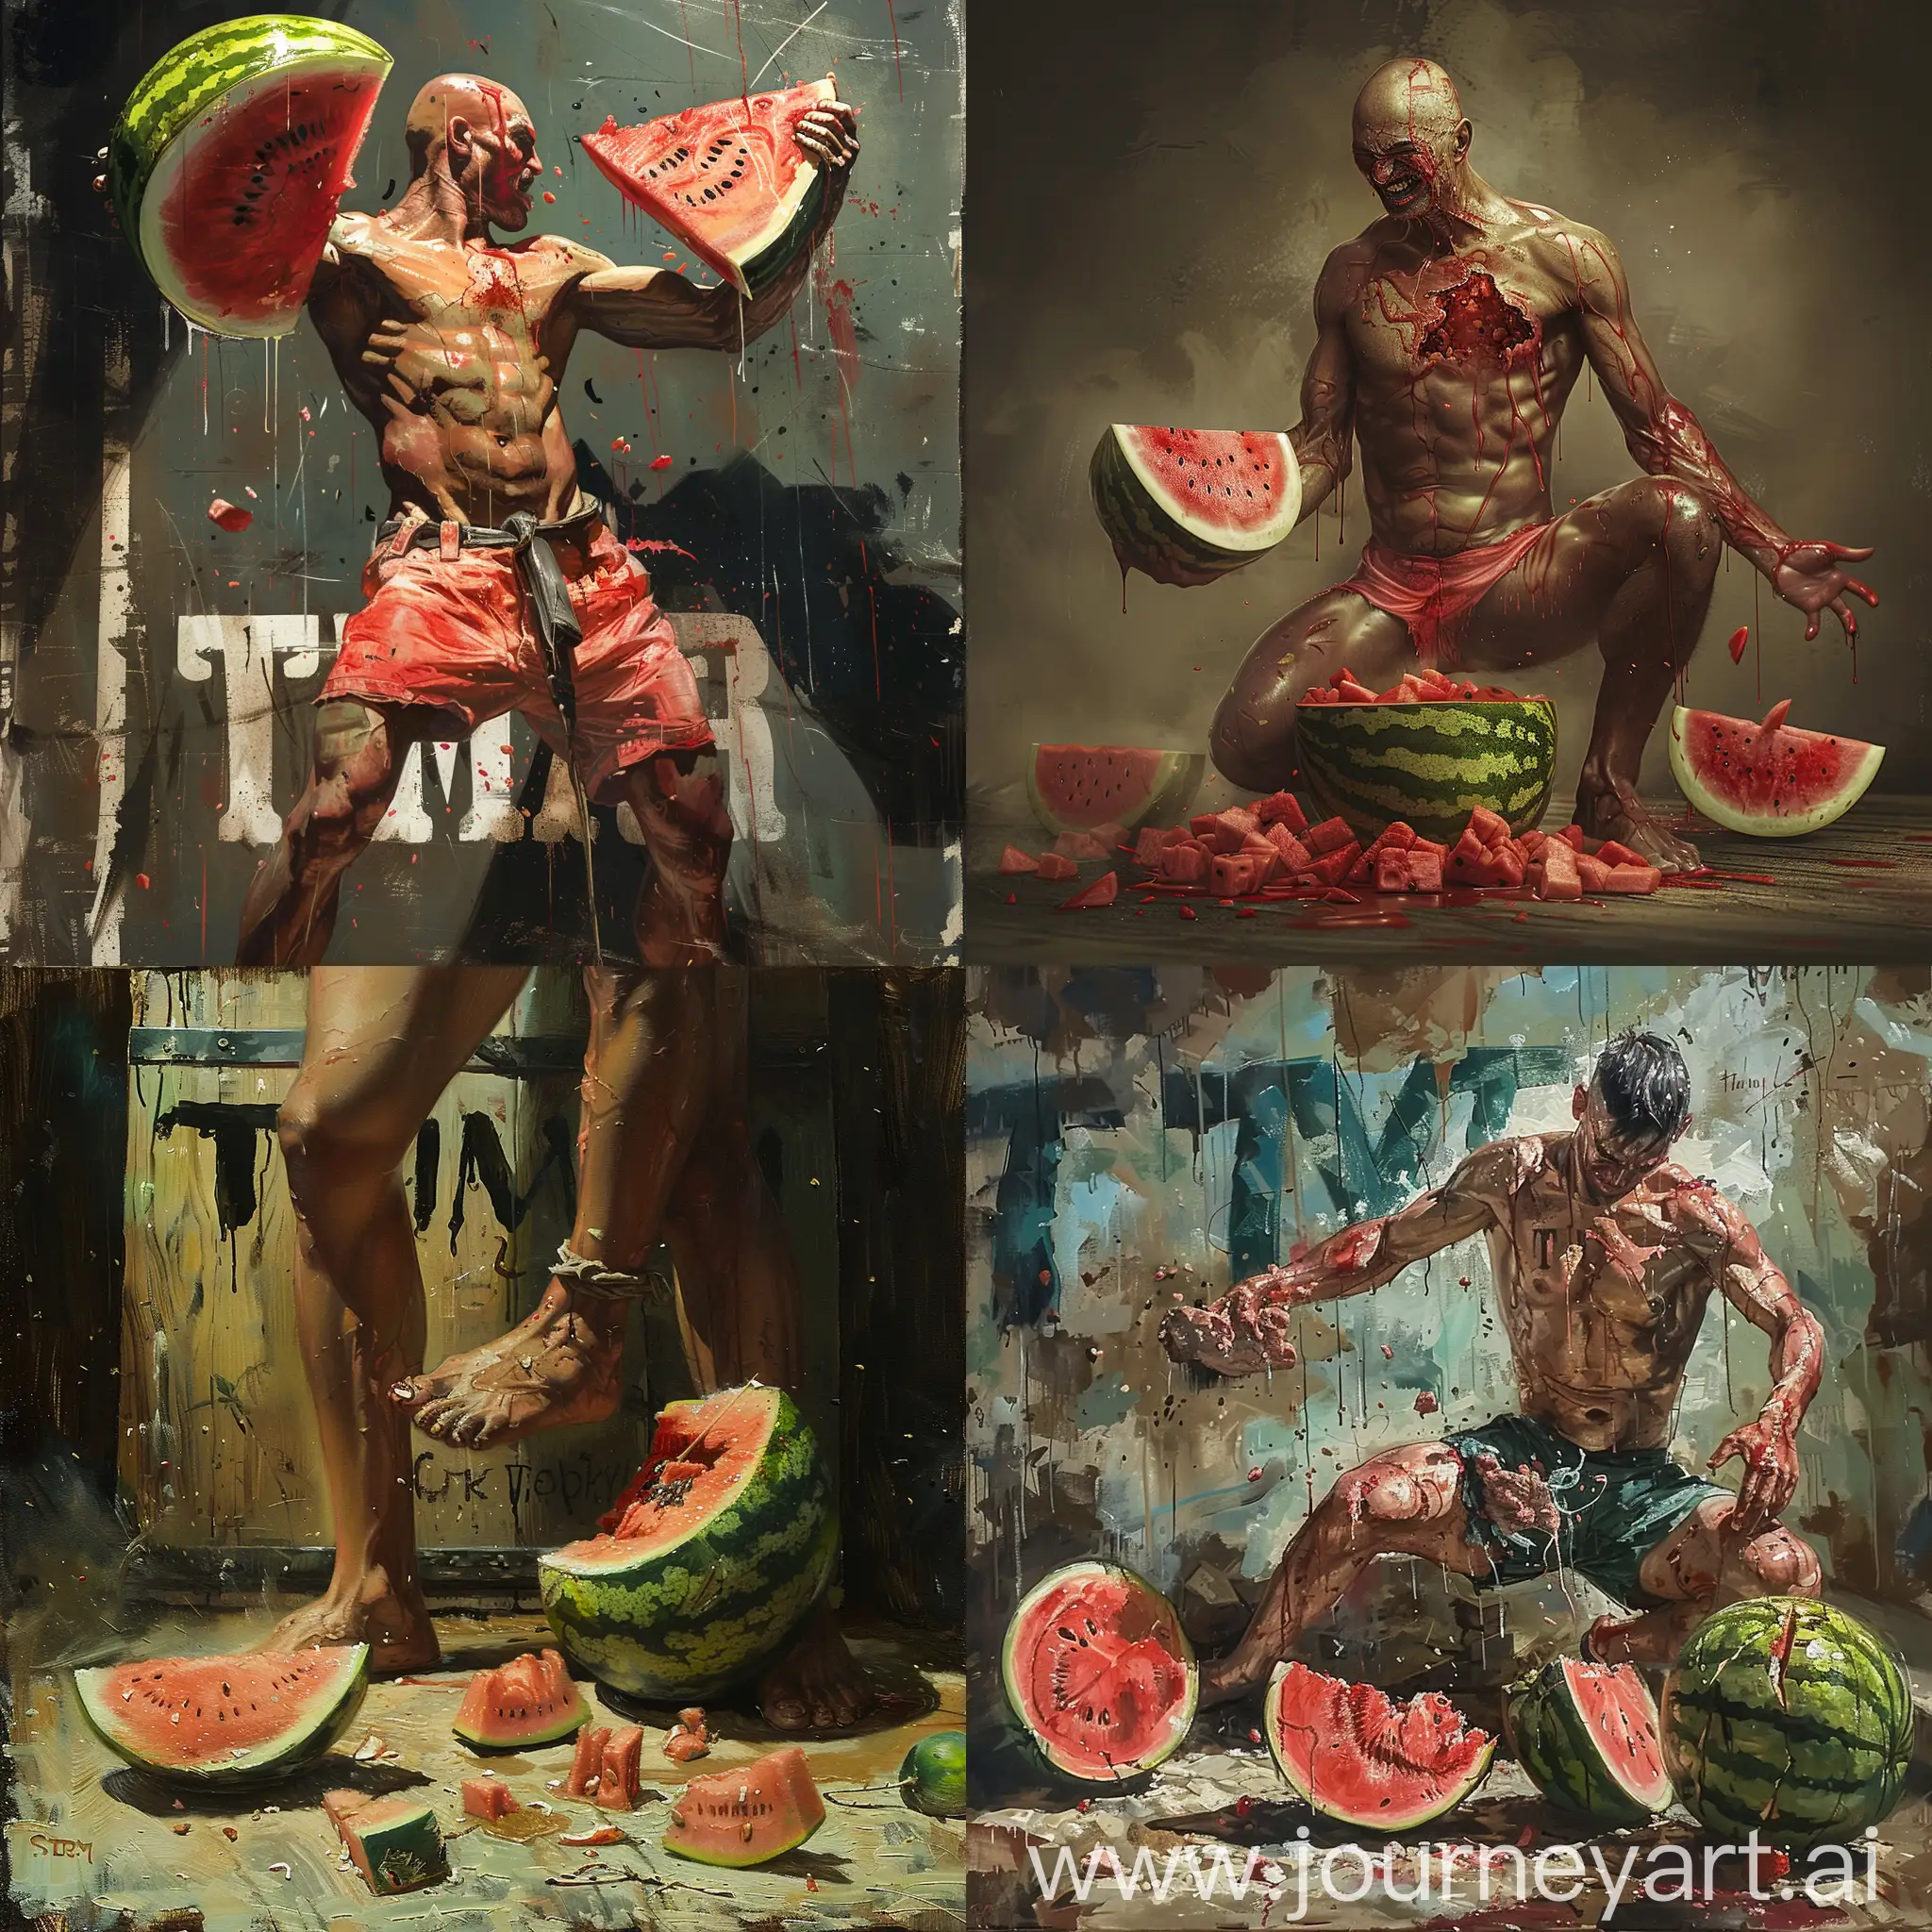 The picture should show a sporty man who crushes a watermelon with his foot. The watermelon shatters into pieces. On the chest of this man hangs a sign "Timur"